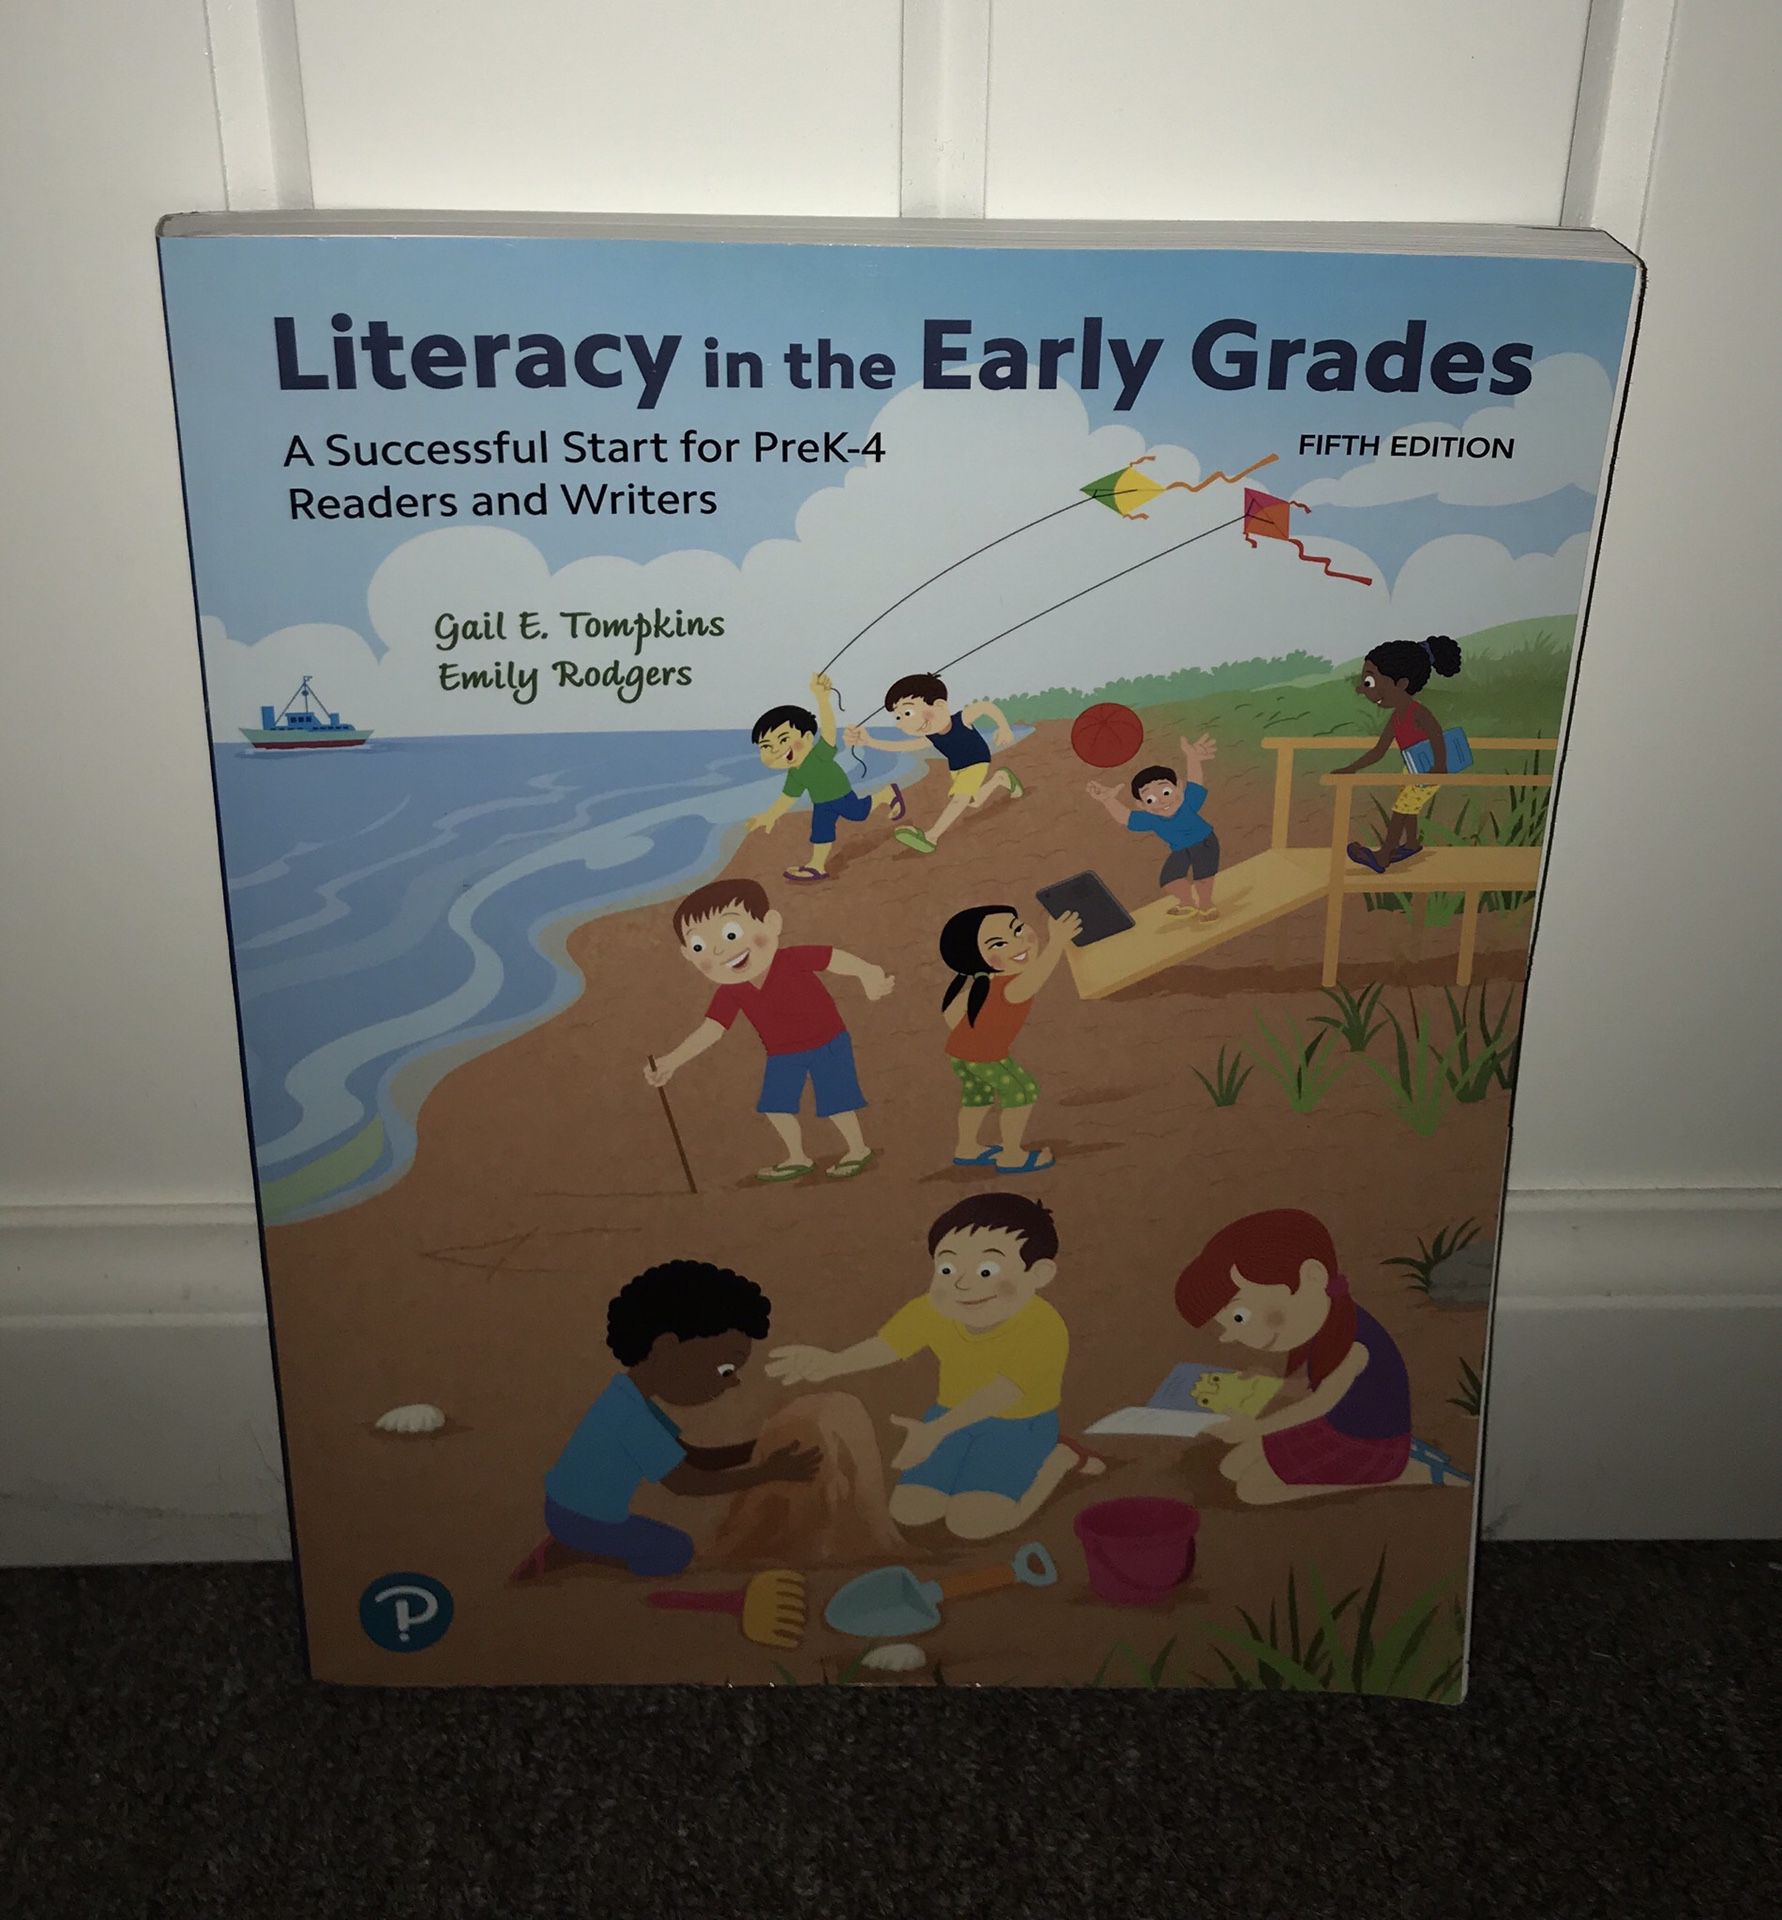 Literacy in the Early Grades 5th Edition by Gail E. Tompkins & Emily Rodgers